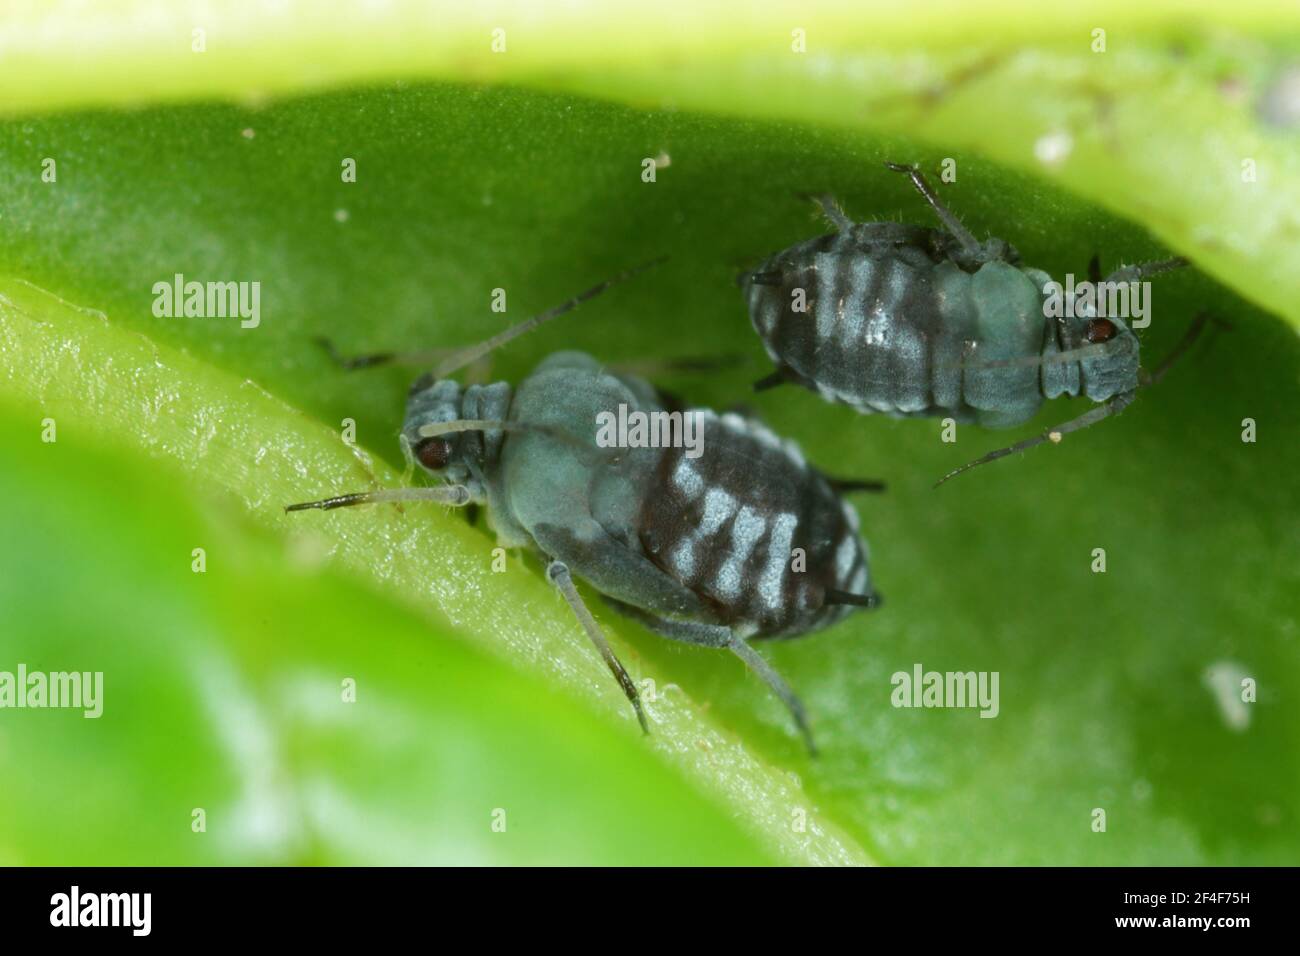 The black bean aphid (Aphis fabae) is a member of the order Hemiptera. Other common names include blackfly, bean aphid and beet leaf aphid. Insects on Stock Photo